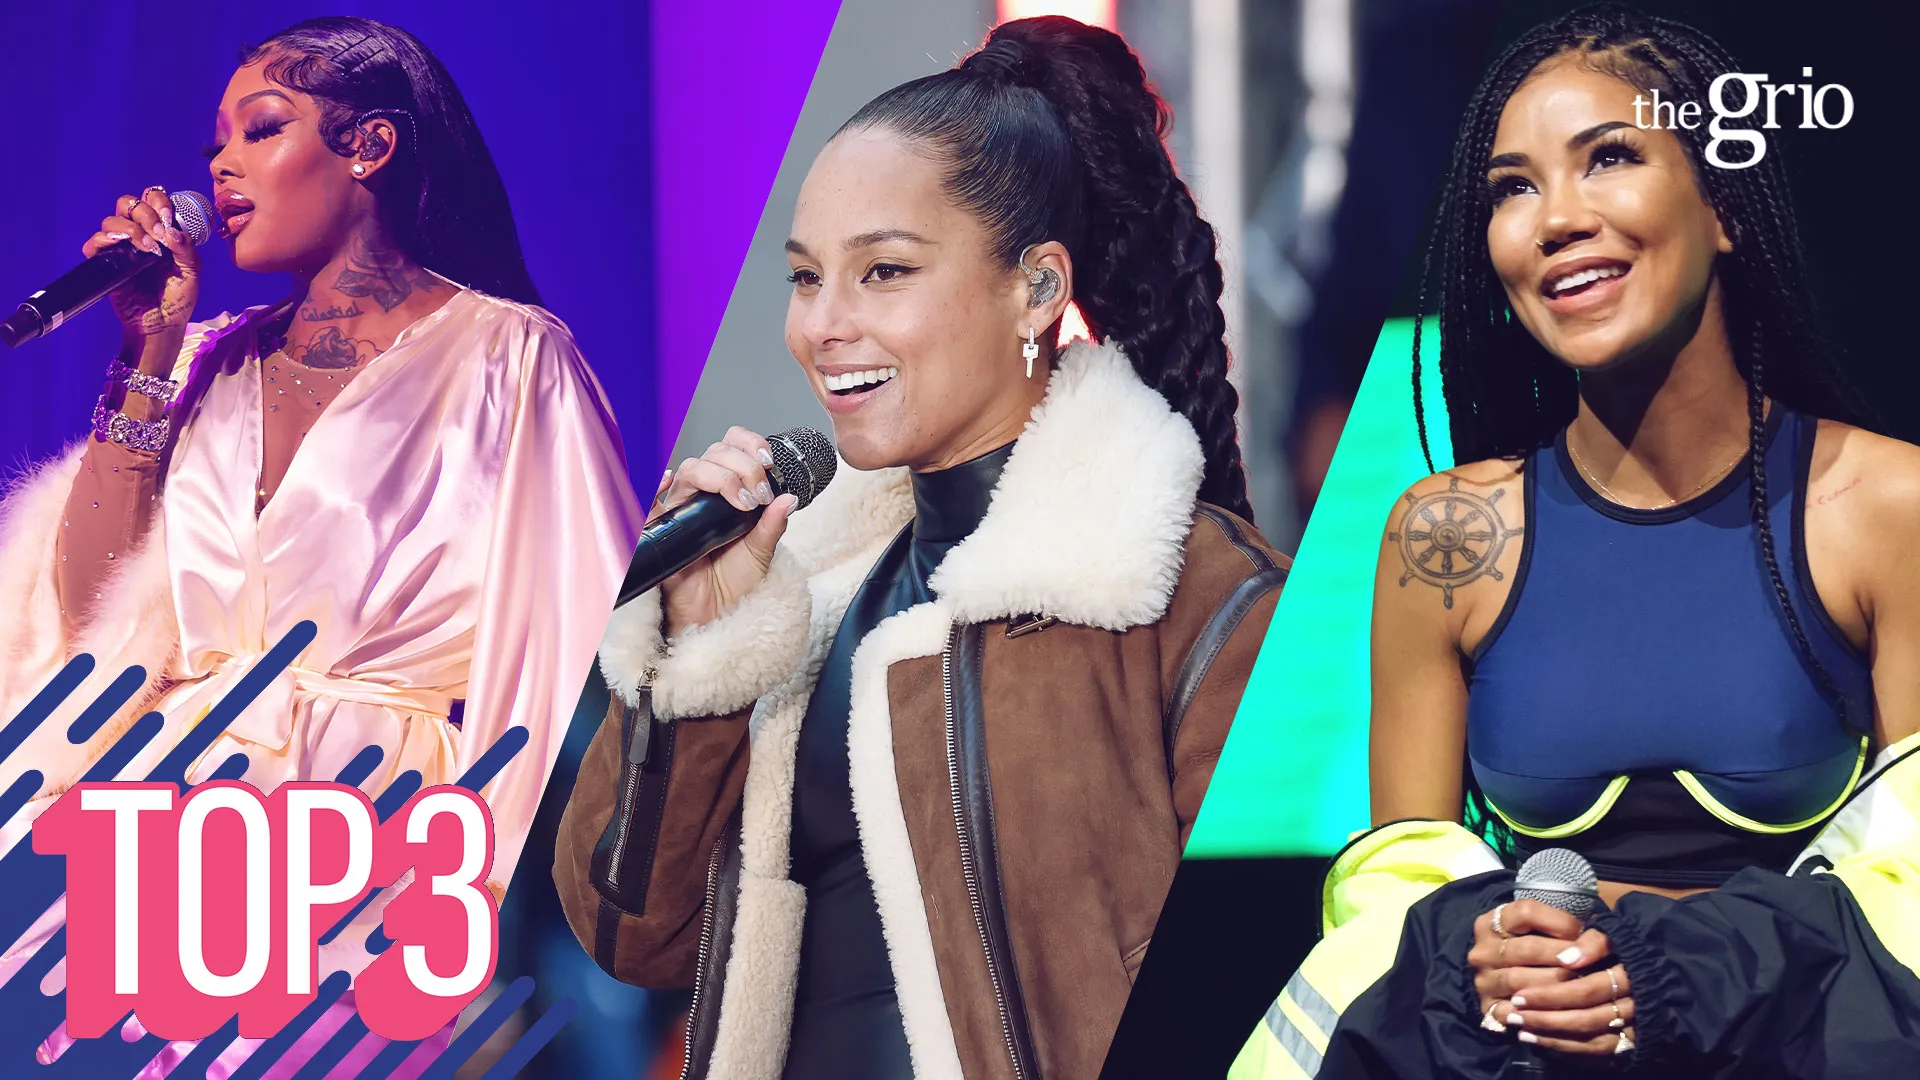 Watch:  theGrio Top 3 | Who are the top 3 female R&B singers of all time?